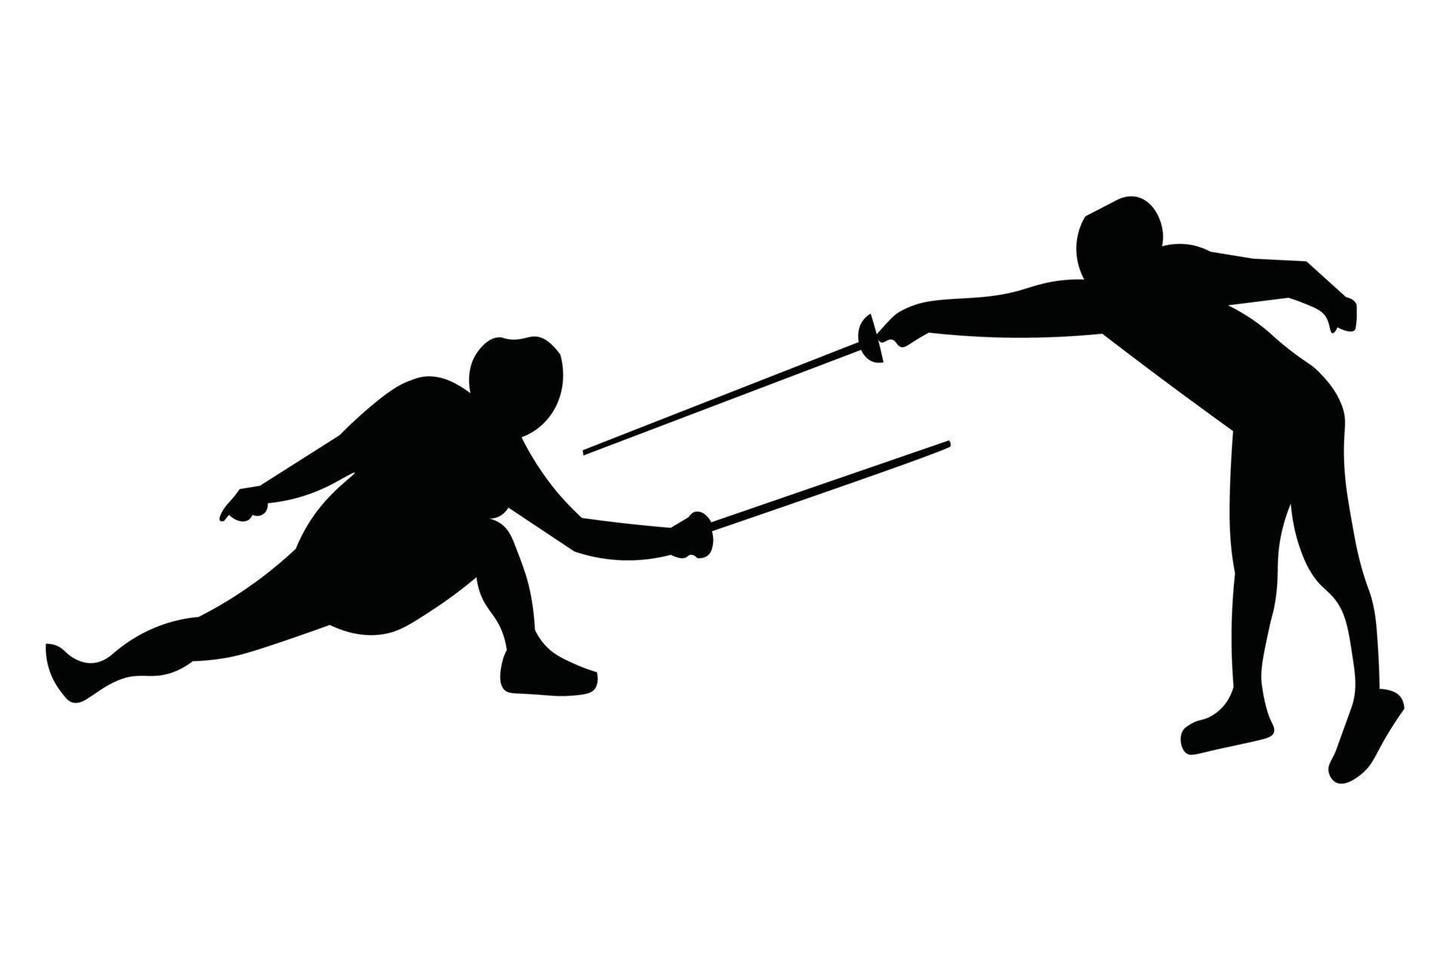 Fencing silhouette vector illustration